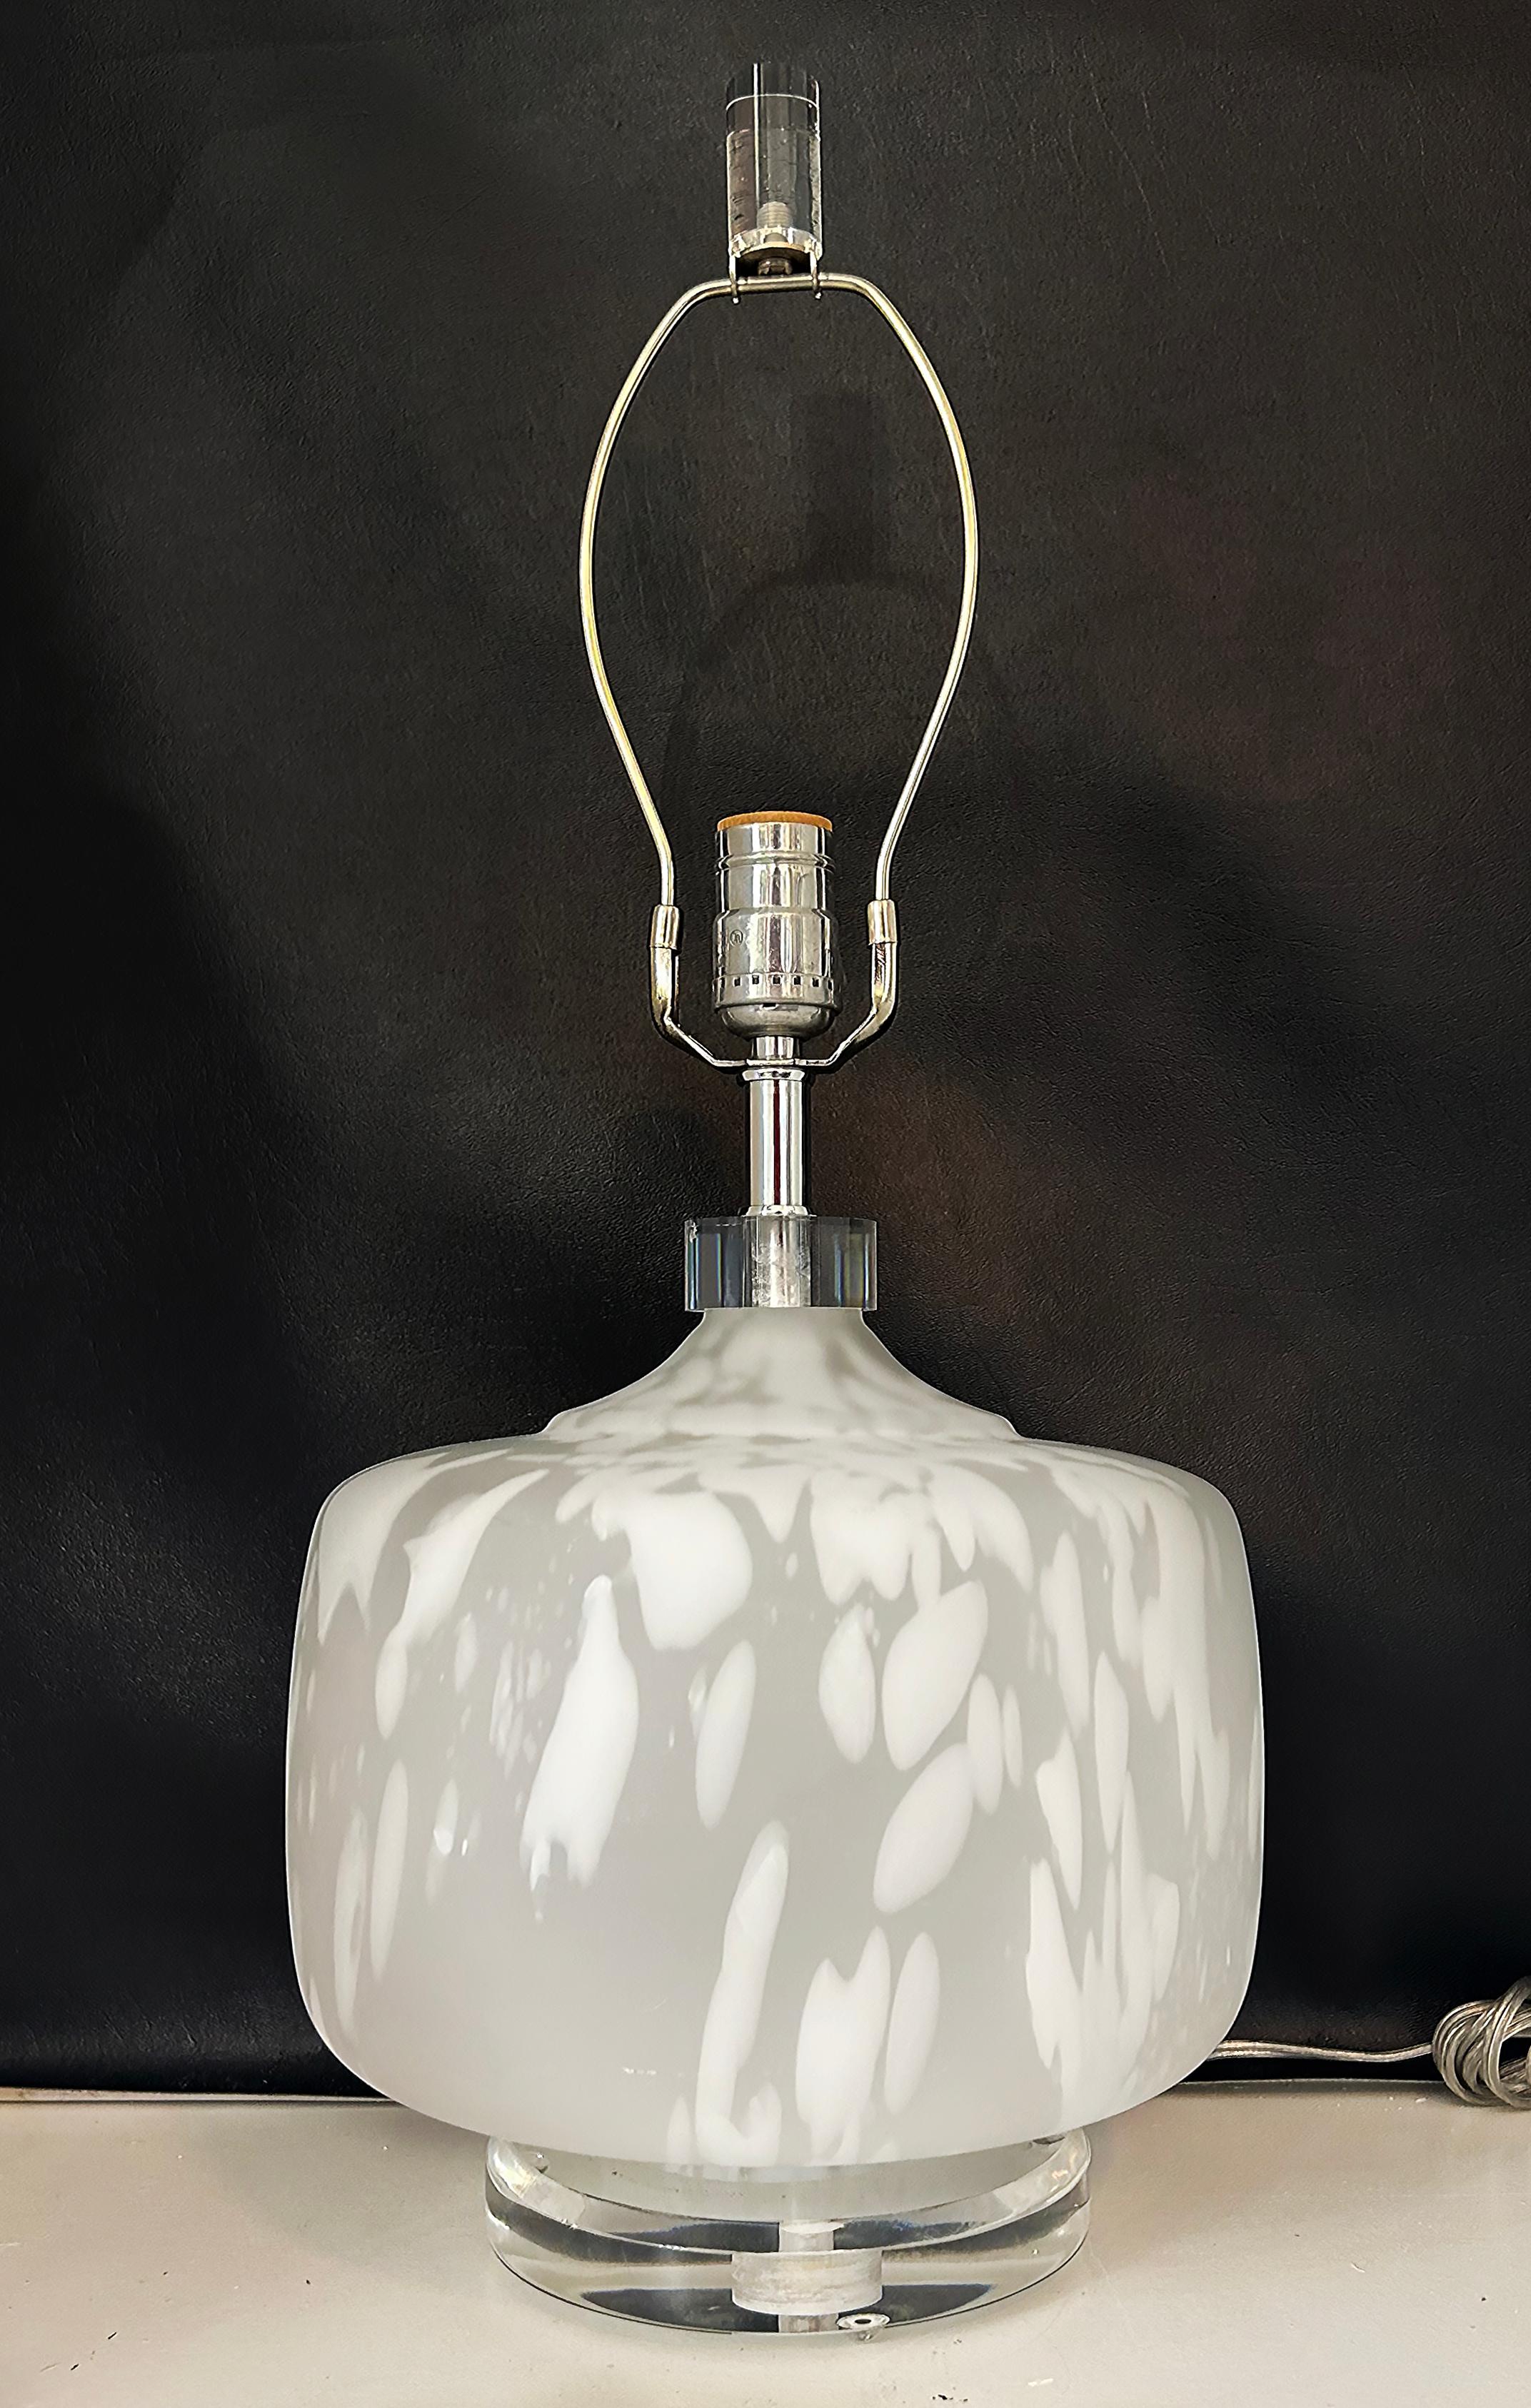 Bauer Mottled Glass and Lucite Table Lamp a New Custom Shade, Wired and Working

Offered for sale is a Bauer Lamp Company mottled glass and lucite mid-century modern table lamp with lucite base and finial.  This lamp was newly re-wired and has a new